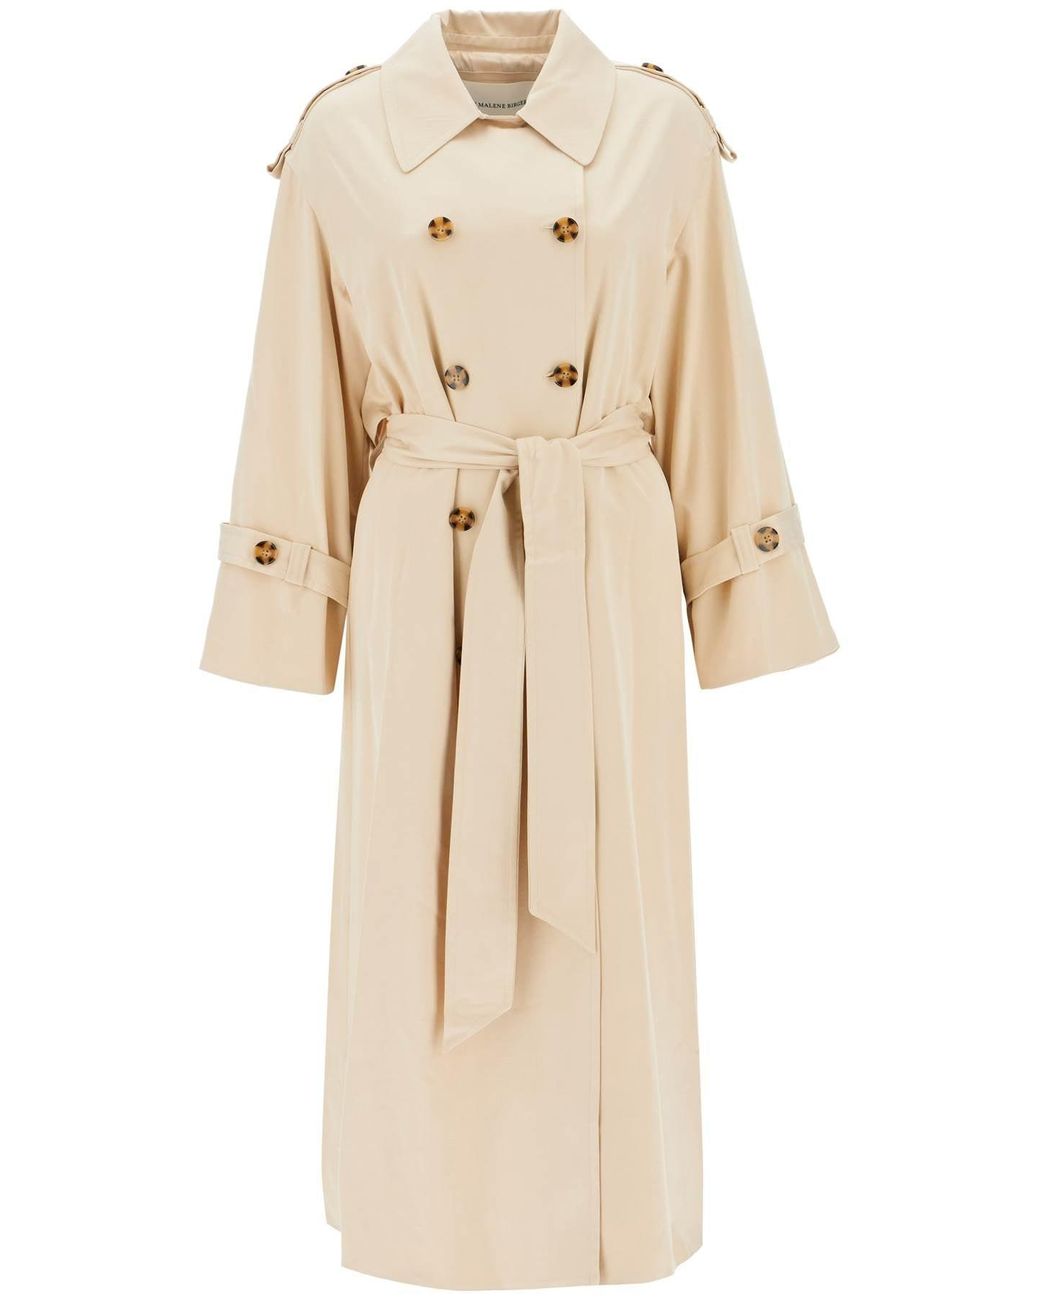 By Malene Birger 'alanis' Double Breasted Trench Coat in Natural | Lyst